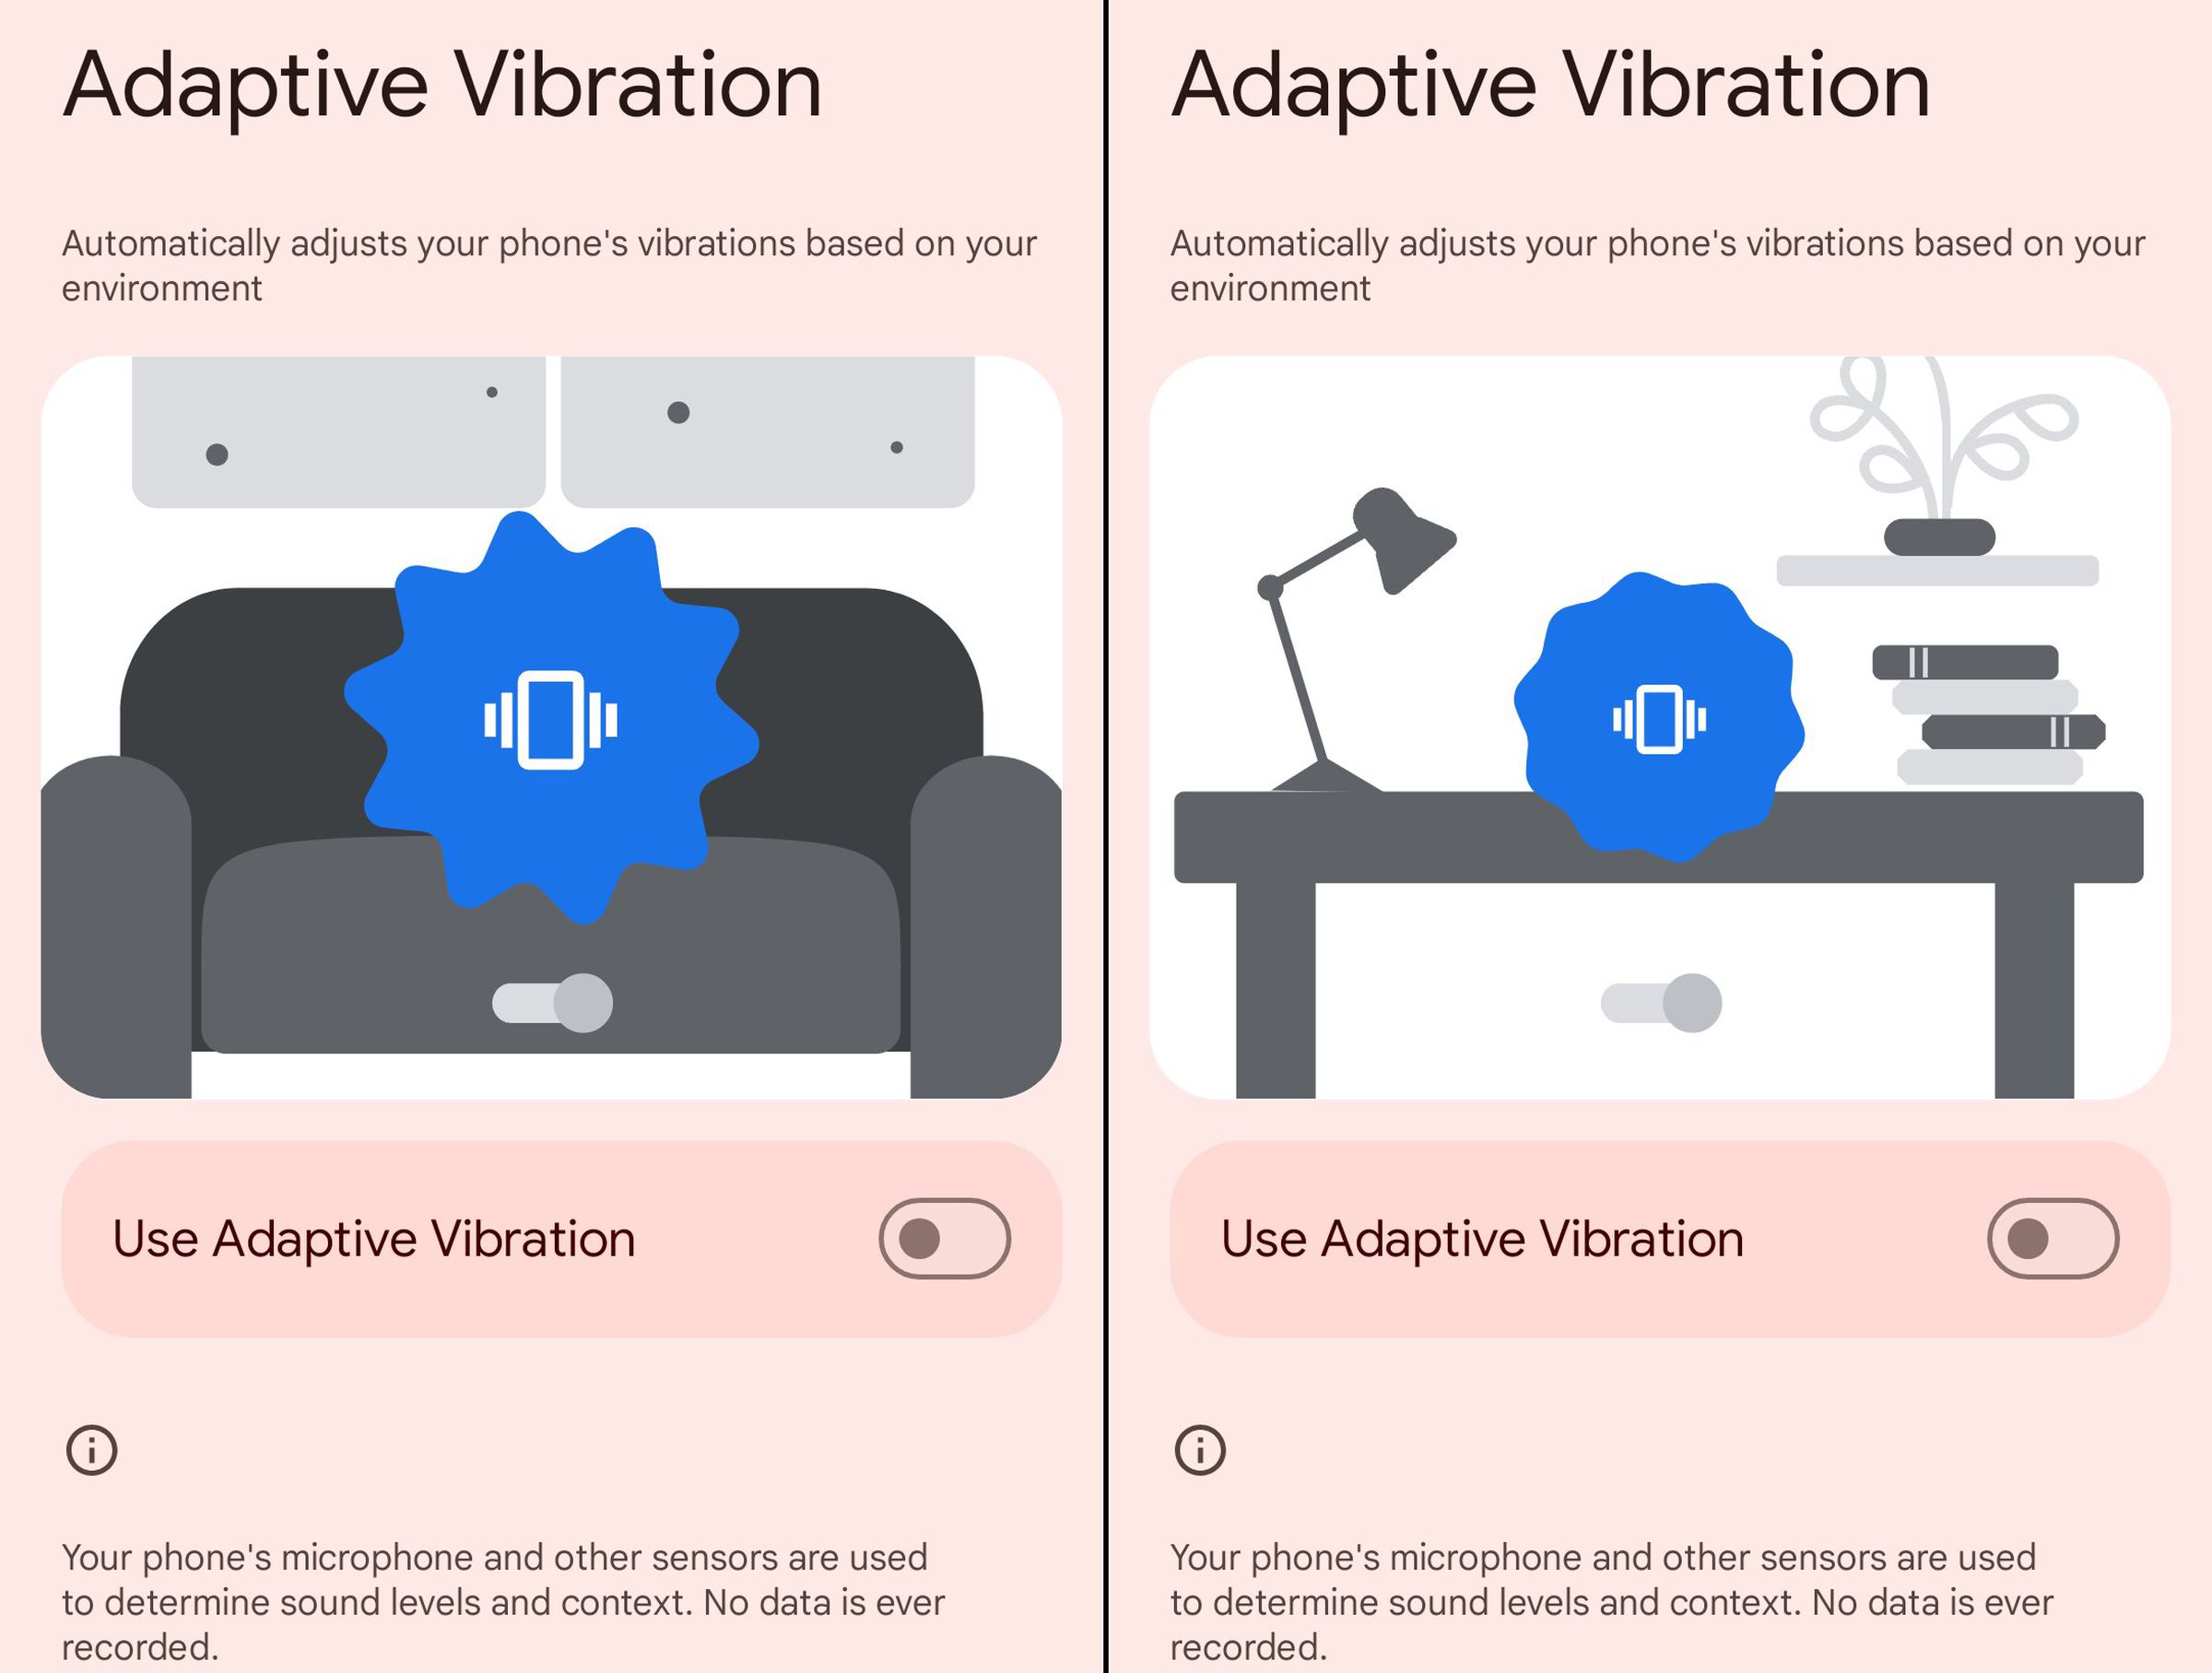 Screenshots of the adaptive vibration settings screen showing how it could be more intense on some survaces, and less intense on others.